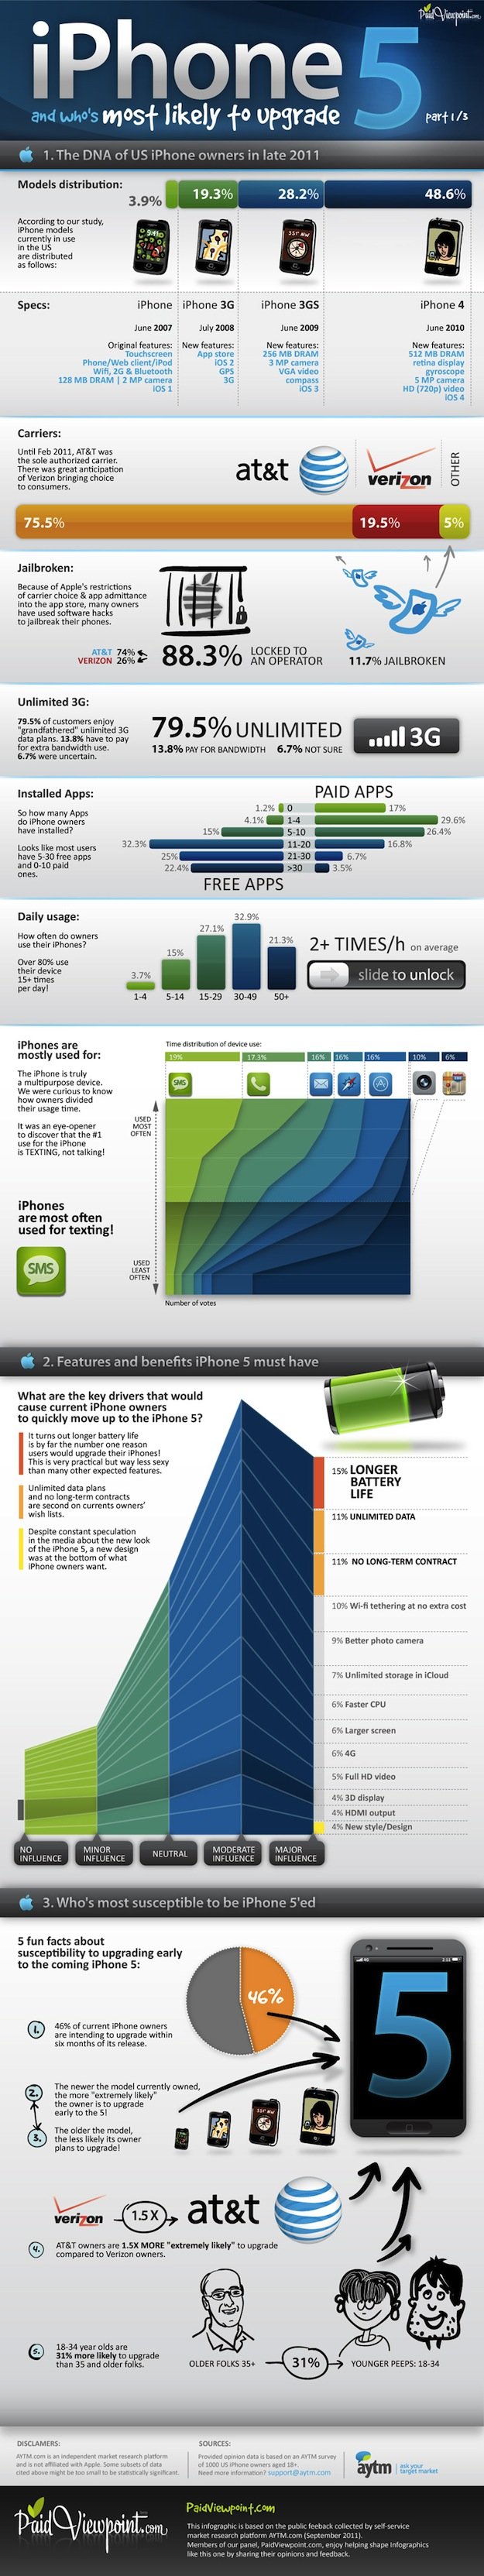 iPhone 5 release infographic